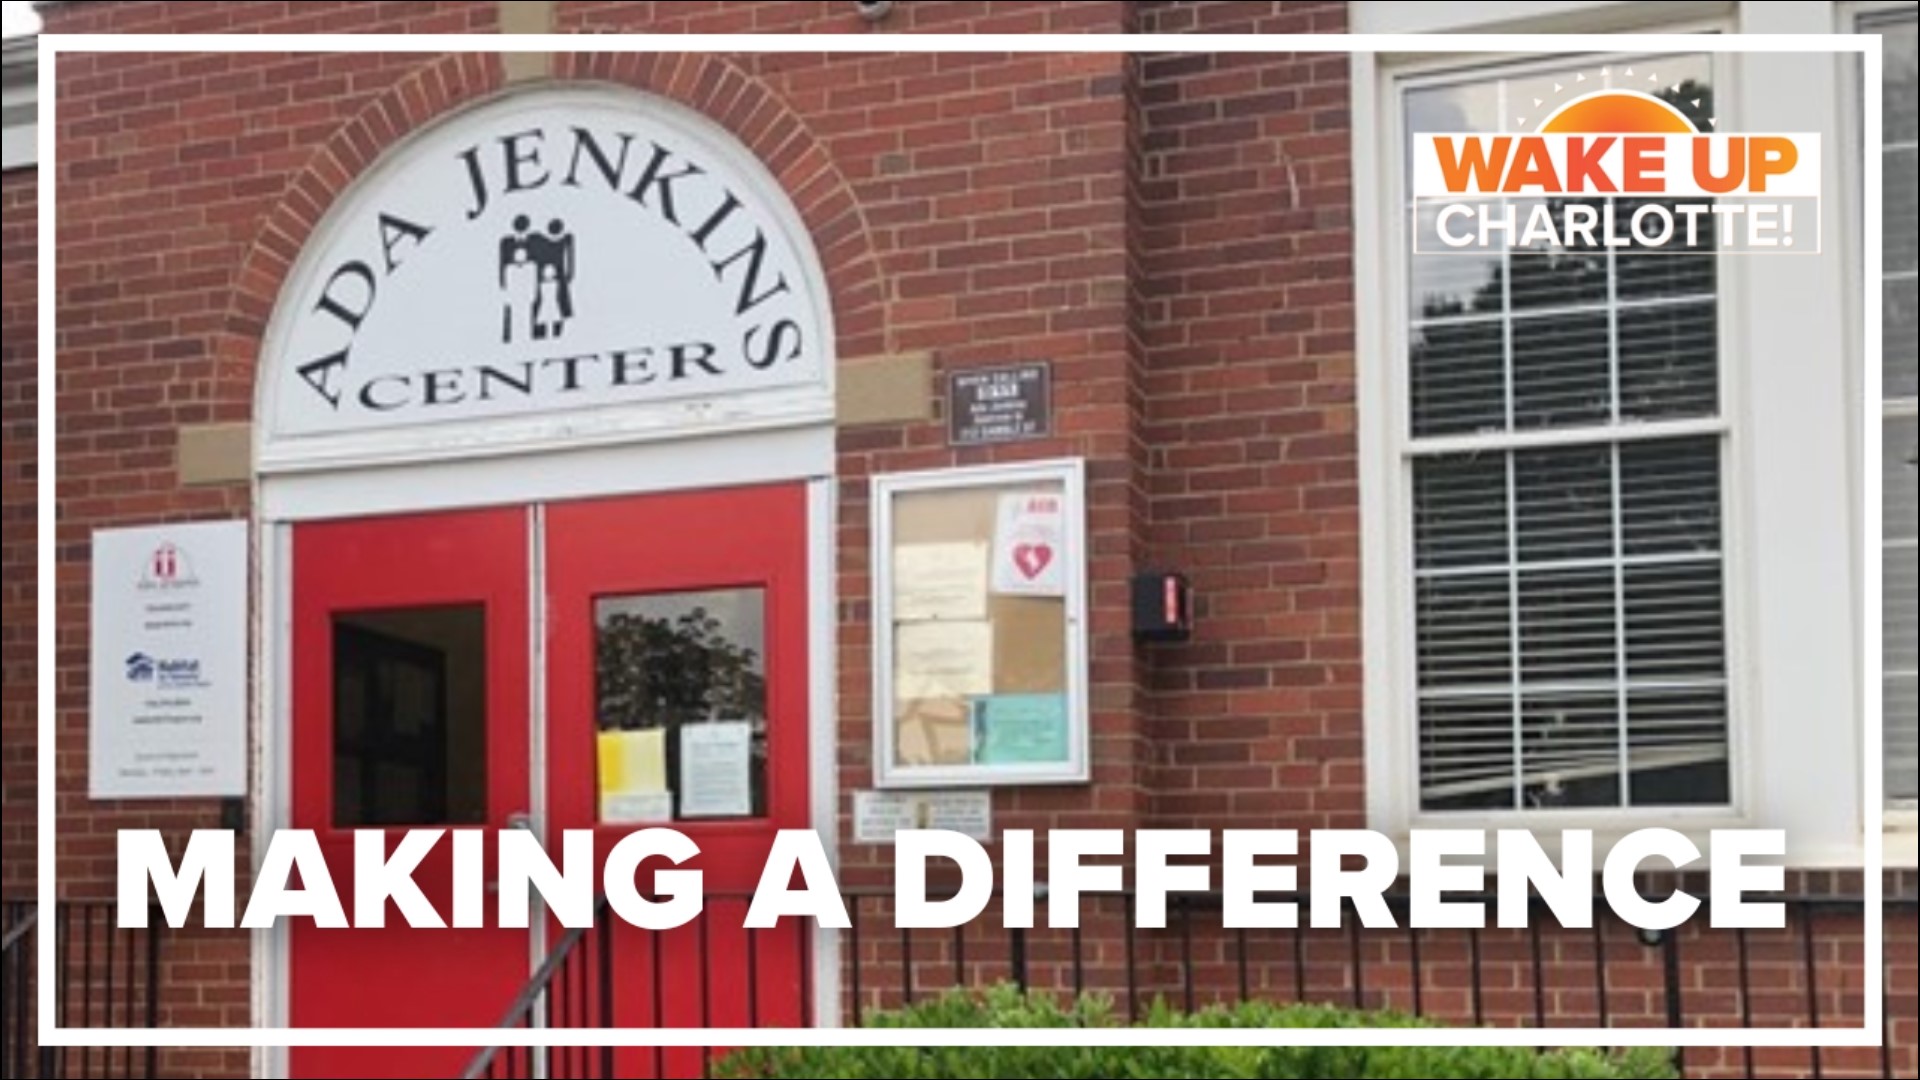 The Ada Jenkins Center in Davidson carries on the legacy of a devoted teacher, providing everything from food to after-school programs.